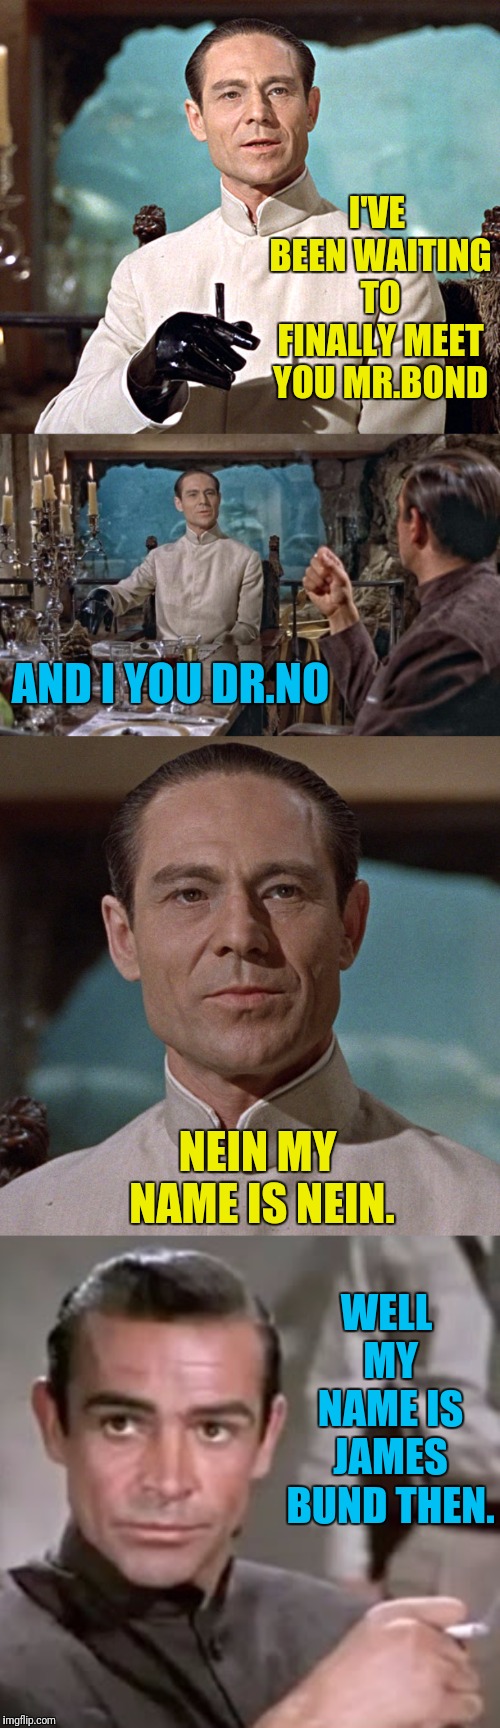 Pund James Pund | I'VE BEEN WAITING TO FINALLY MEET YOU MR.BOND; AND I YOU DR.NO; NEIN MY NAME IS NEIN. WELL MY NAME IS JAMES BUND THEN. | image tagged in james bond,007,doctor who,doctor | made w/ Imgflip meme maker